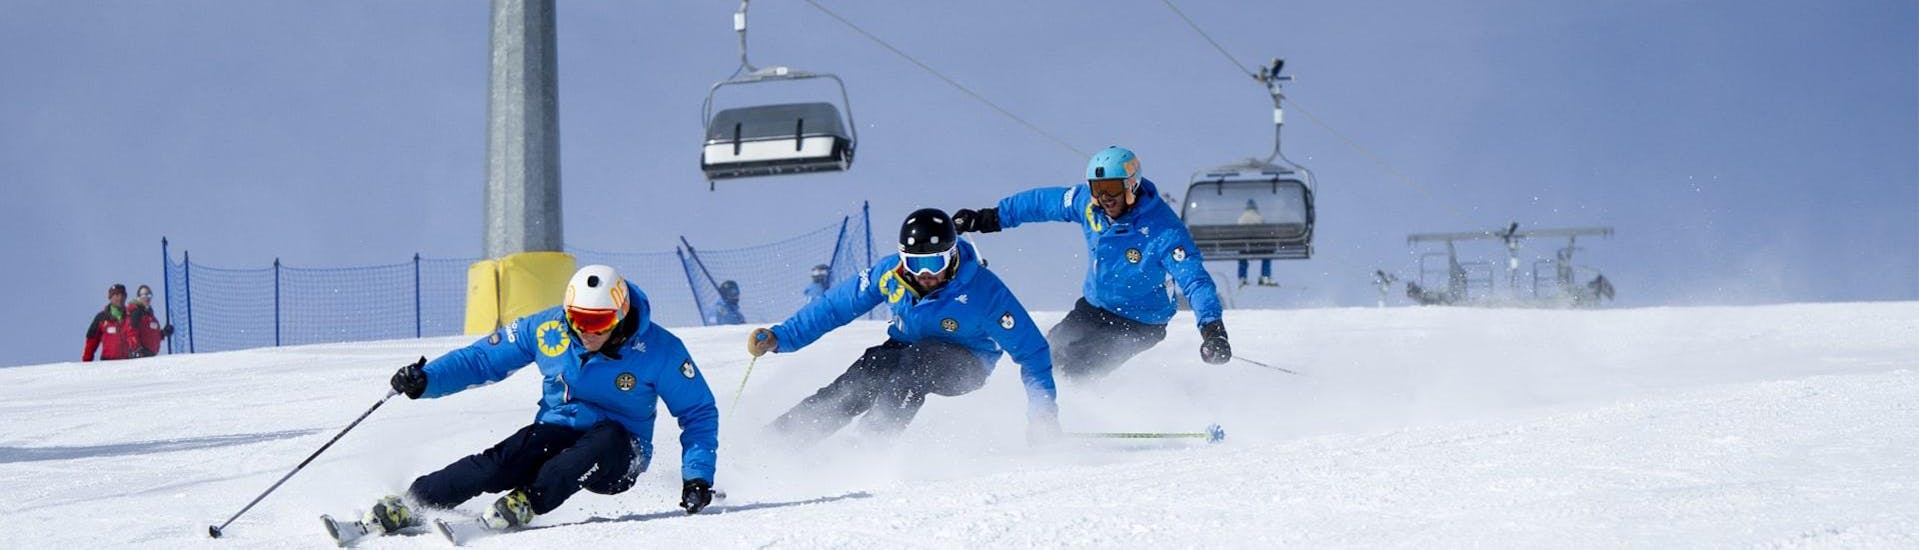 Three ski instructors from the ski school Scuola di Sci Azzurra Livigno skiing down the ski slope in formation during one of the Ski Lessons for Adults - All Levels, thereby demonstrating the right skiing technique.